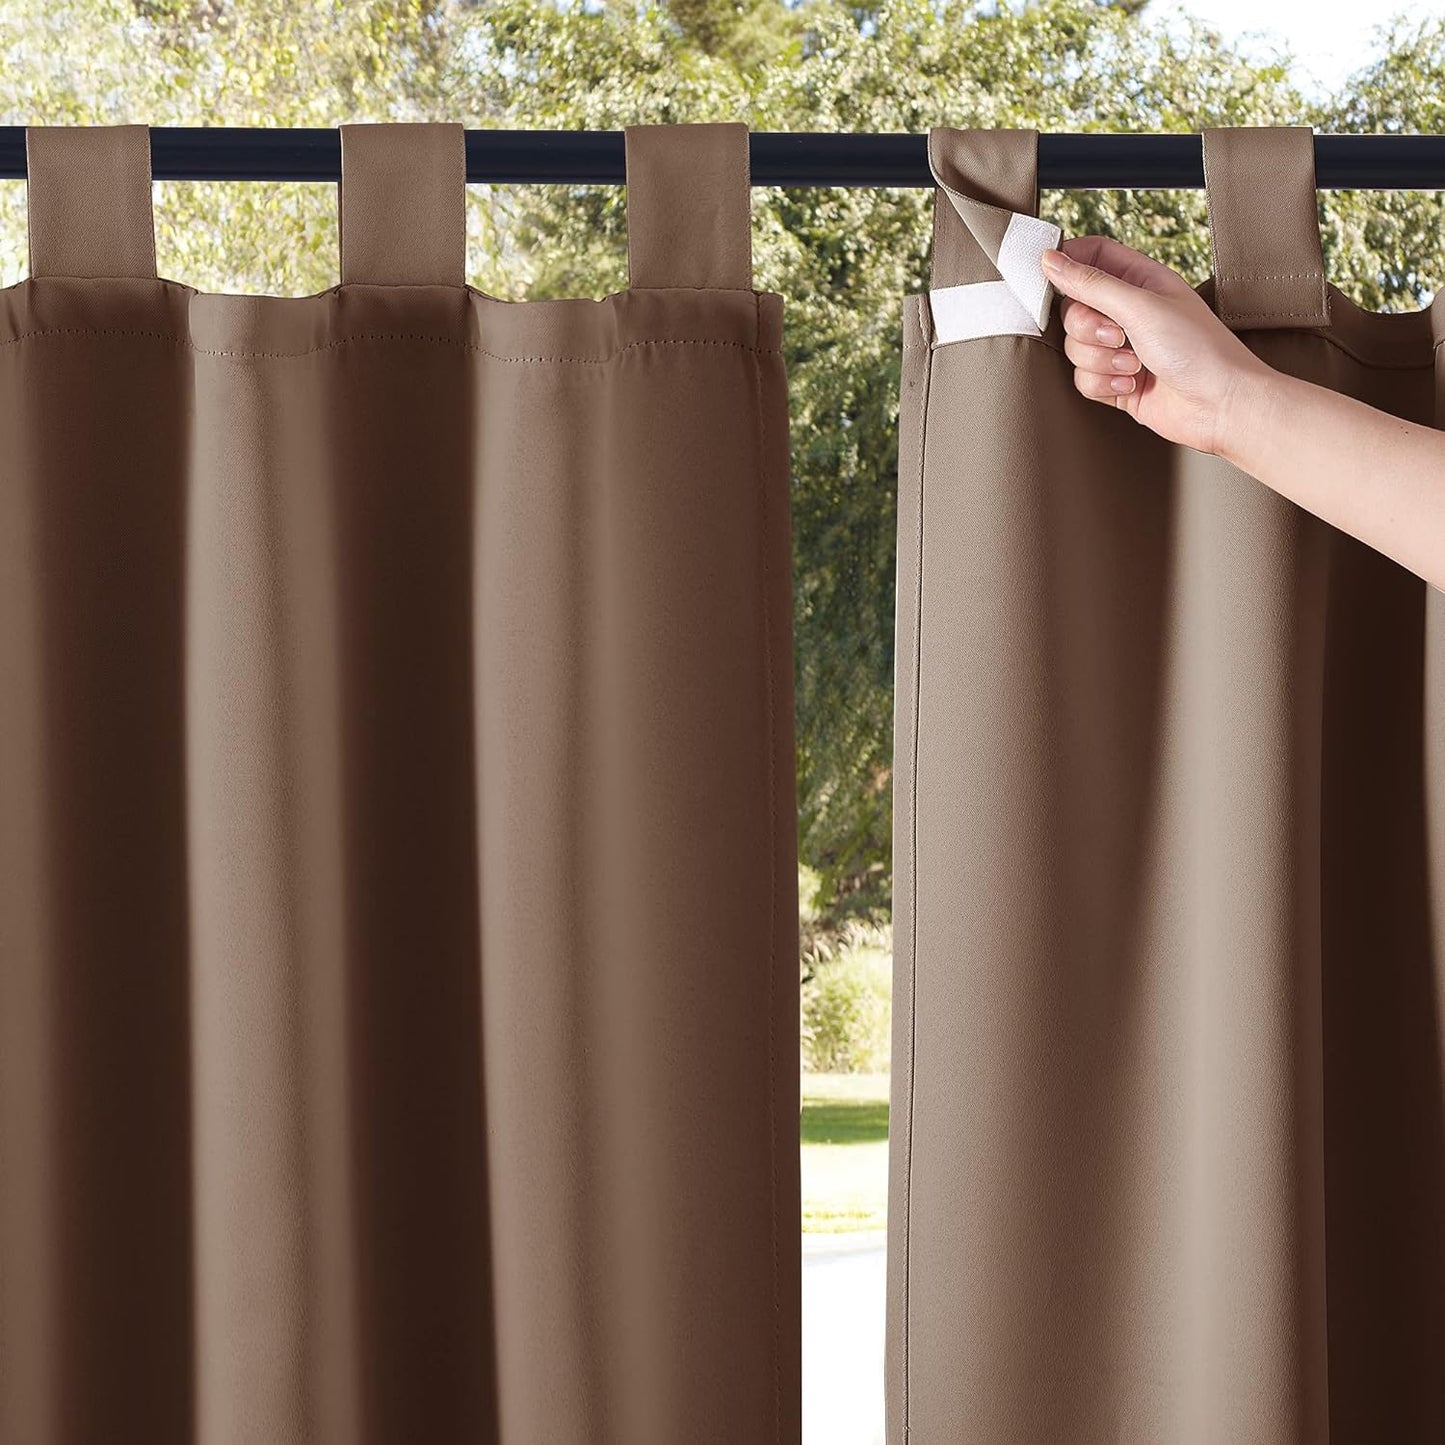 NICETOWN 2 Panels Outdoor Patio Curtainss Waterproof Room Darkening Drapes, Detachable Sticky Tab Top Thermal Insulated Privacy Outdoor Dividers for Porch/Doorway, Biscotti Beige, W52 X L84  NICETOWN Tan W84 X L95 